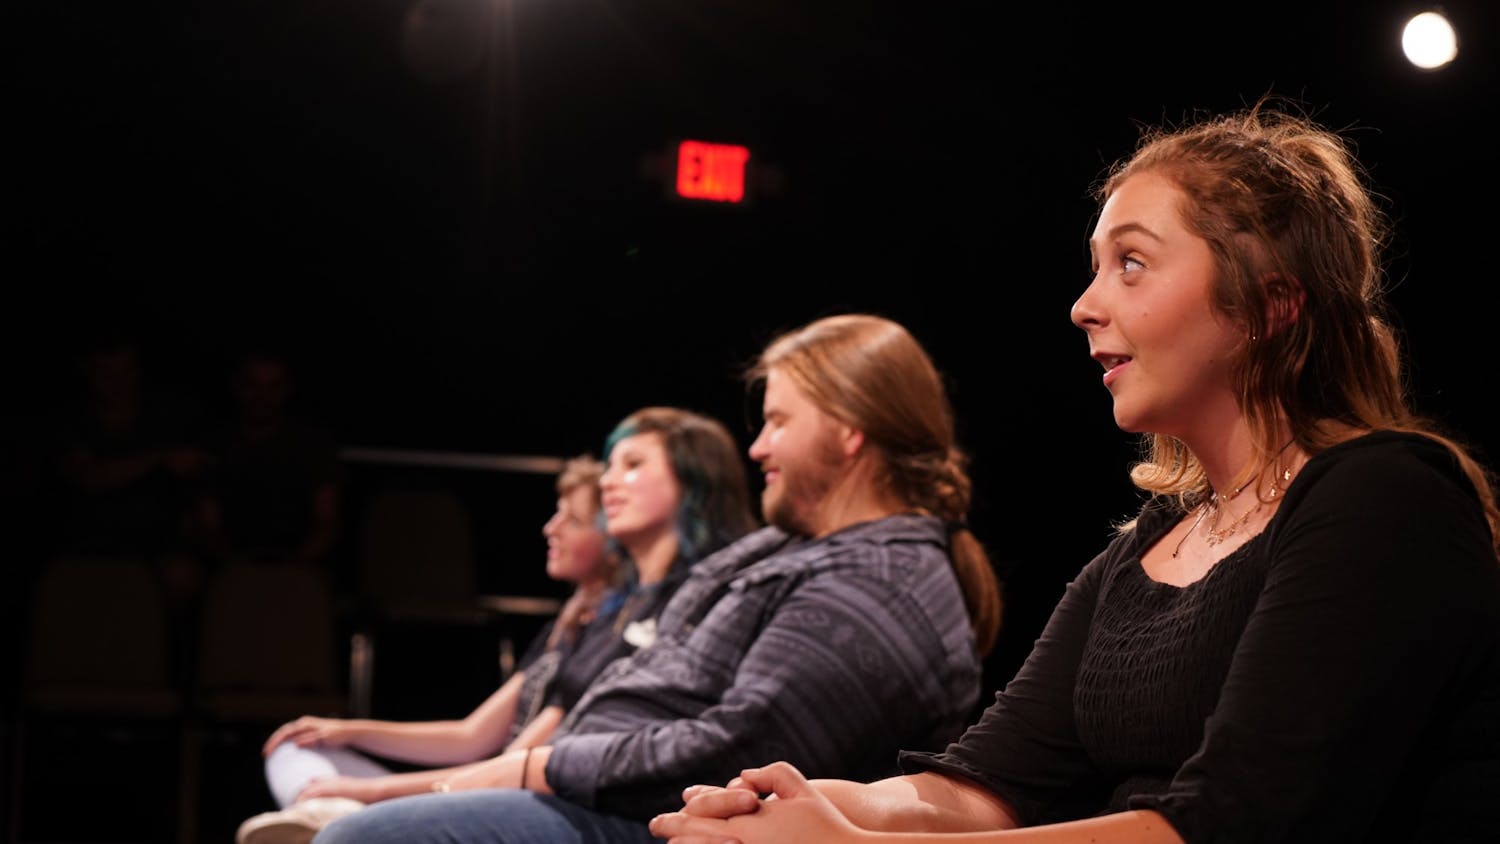 Amber Coulter sits in a row with Casey Downs, Susanna McElveen and Cassidy Spencer during the "Bon Voyage Prov" show in April 2019 by the OverReactors Improv club.